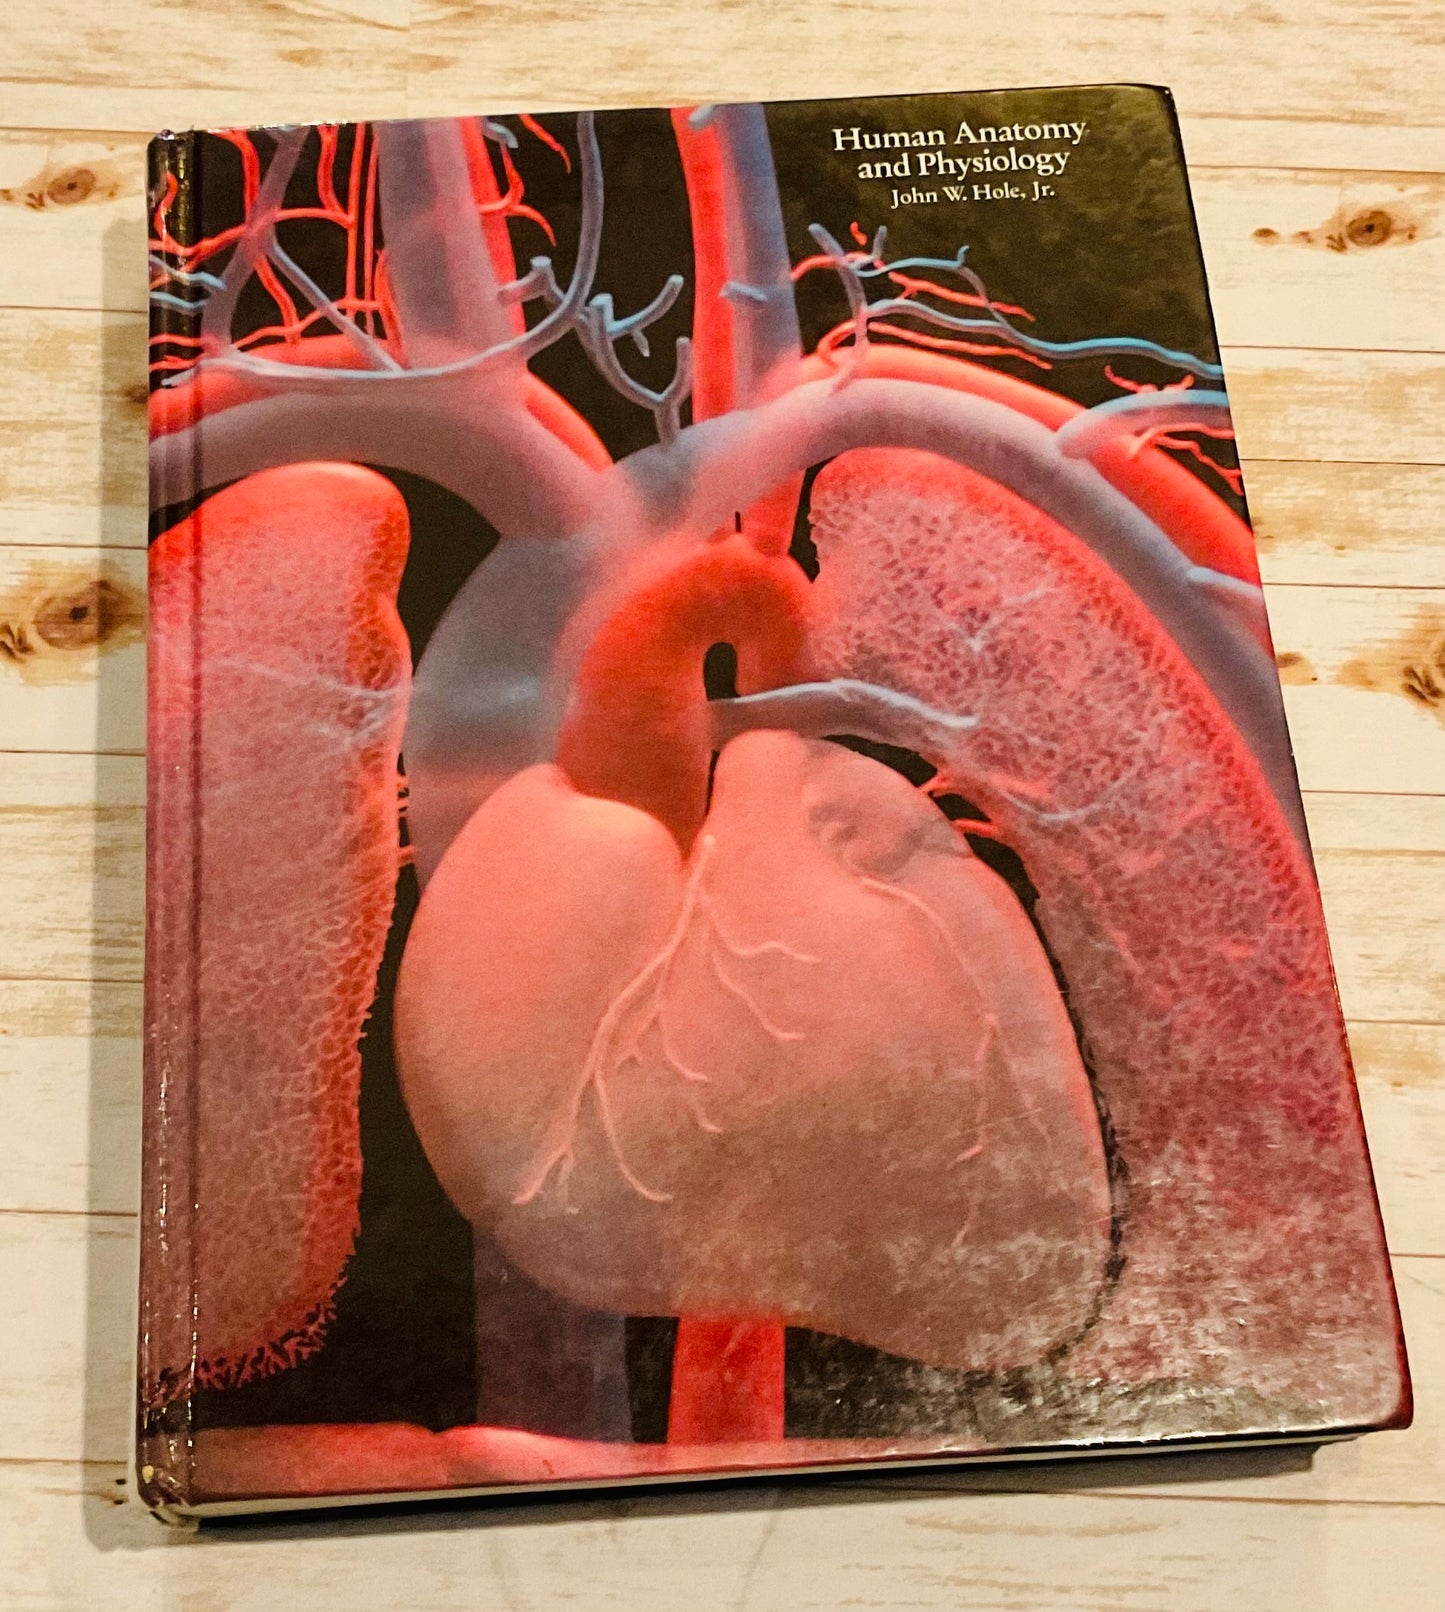 Human Anatomy and Physiology - Anchored Homeschool Resource Center